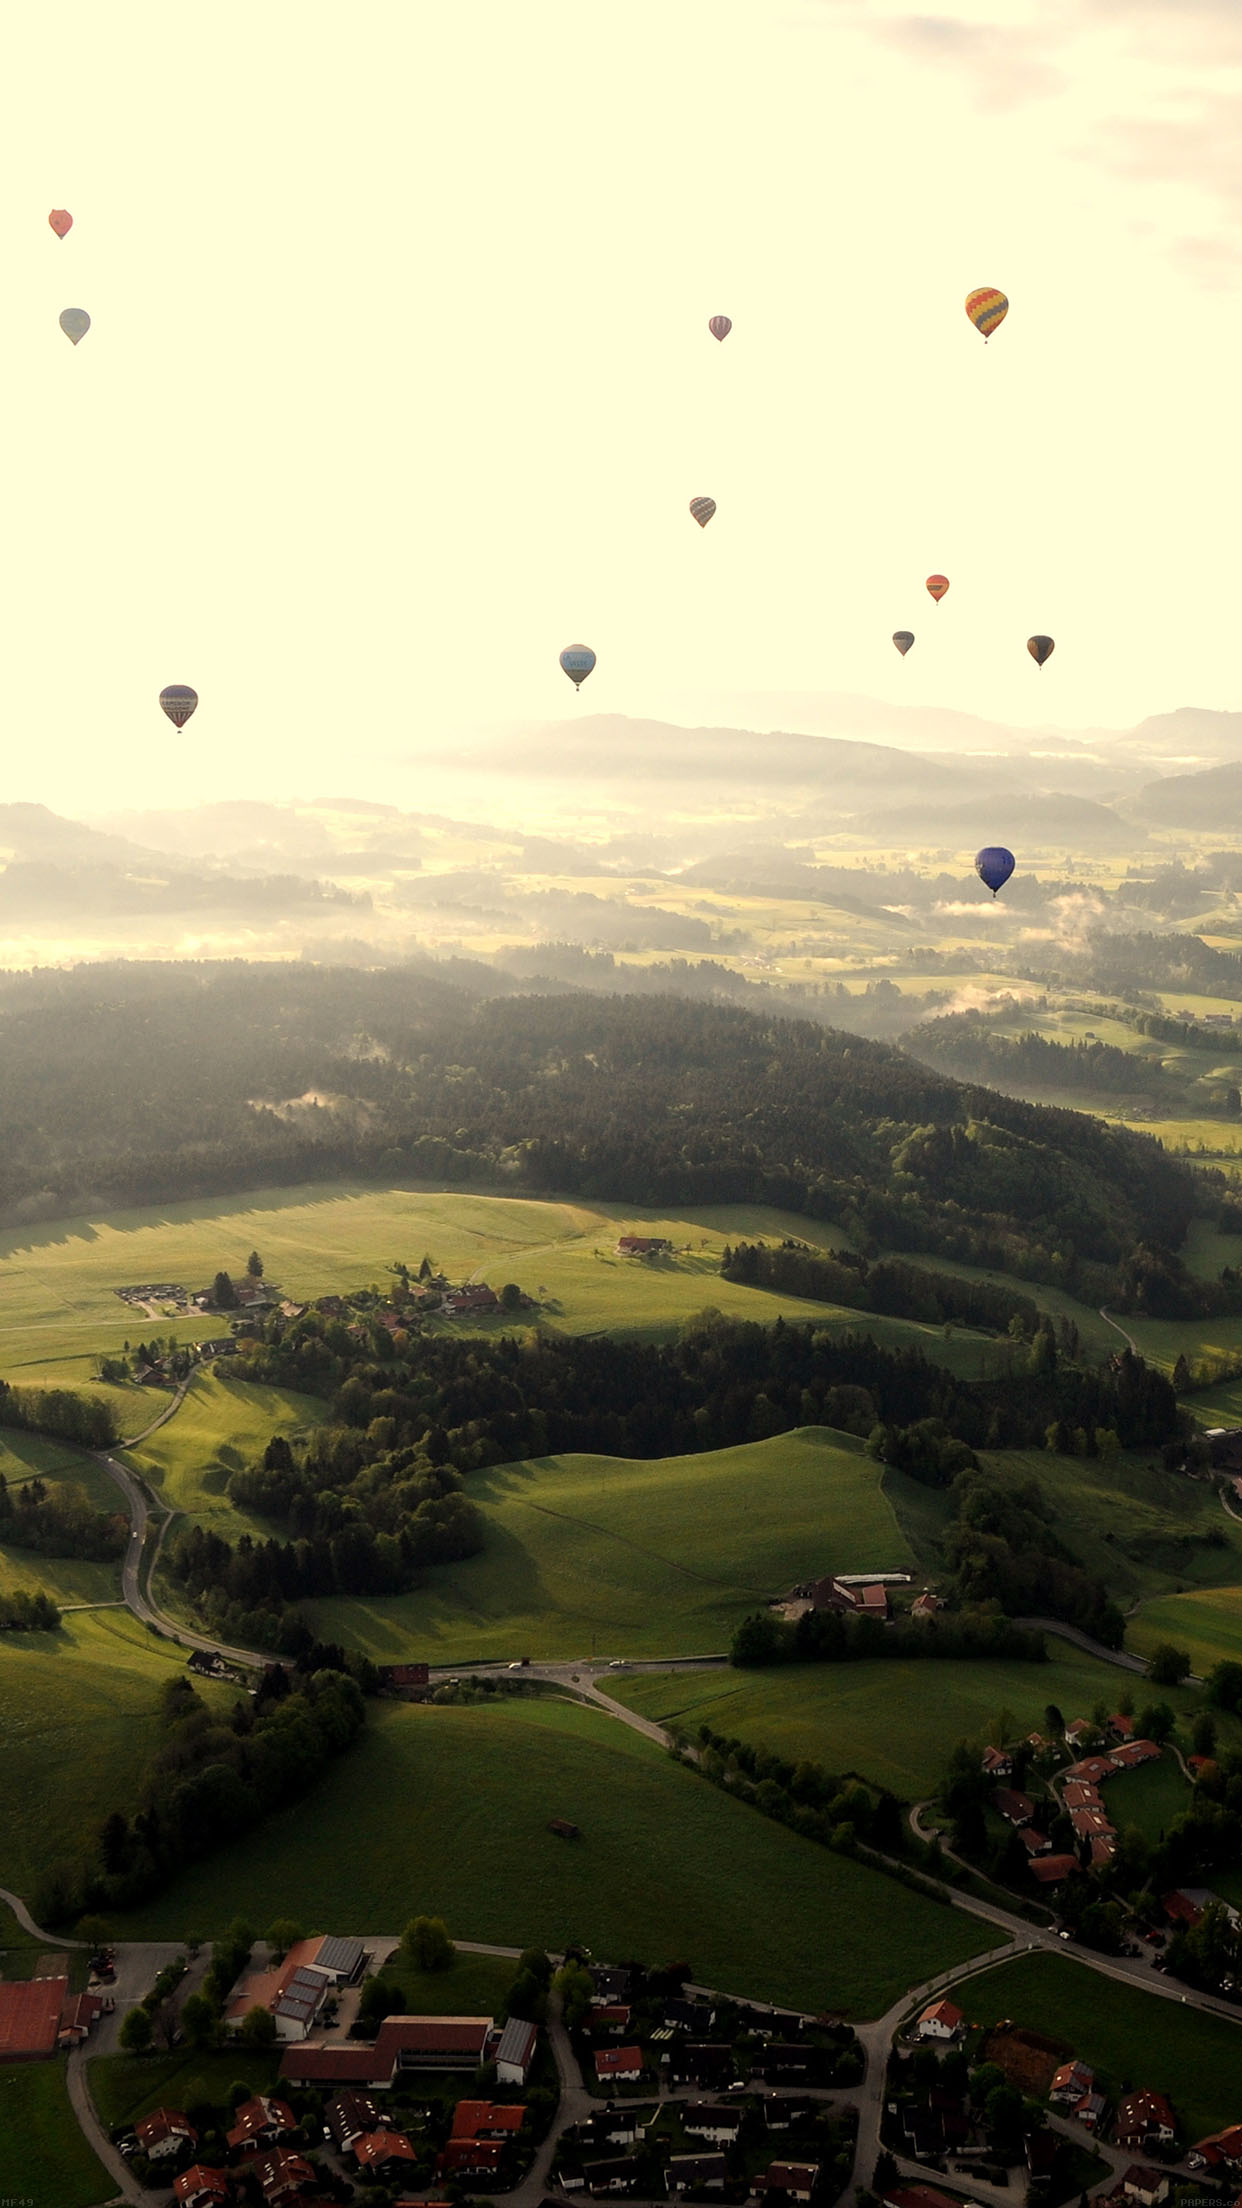 Balloon Party Green Mountain Nature Android wallpaper